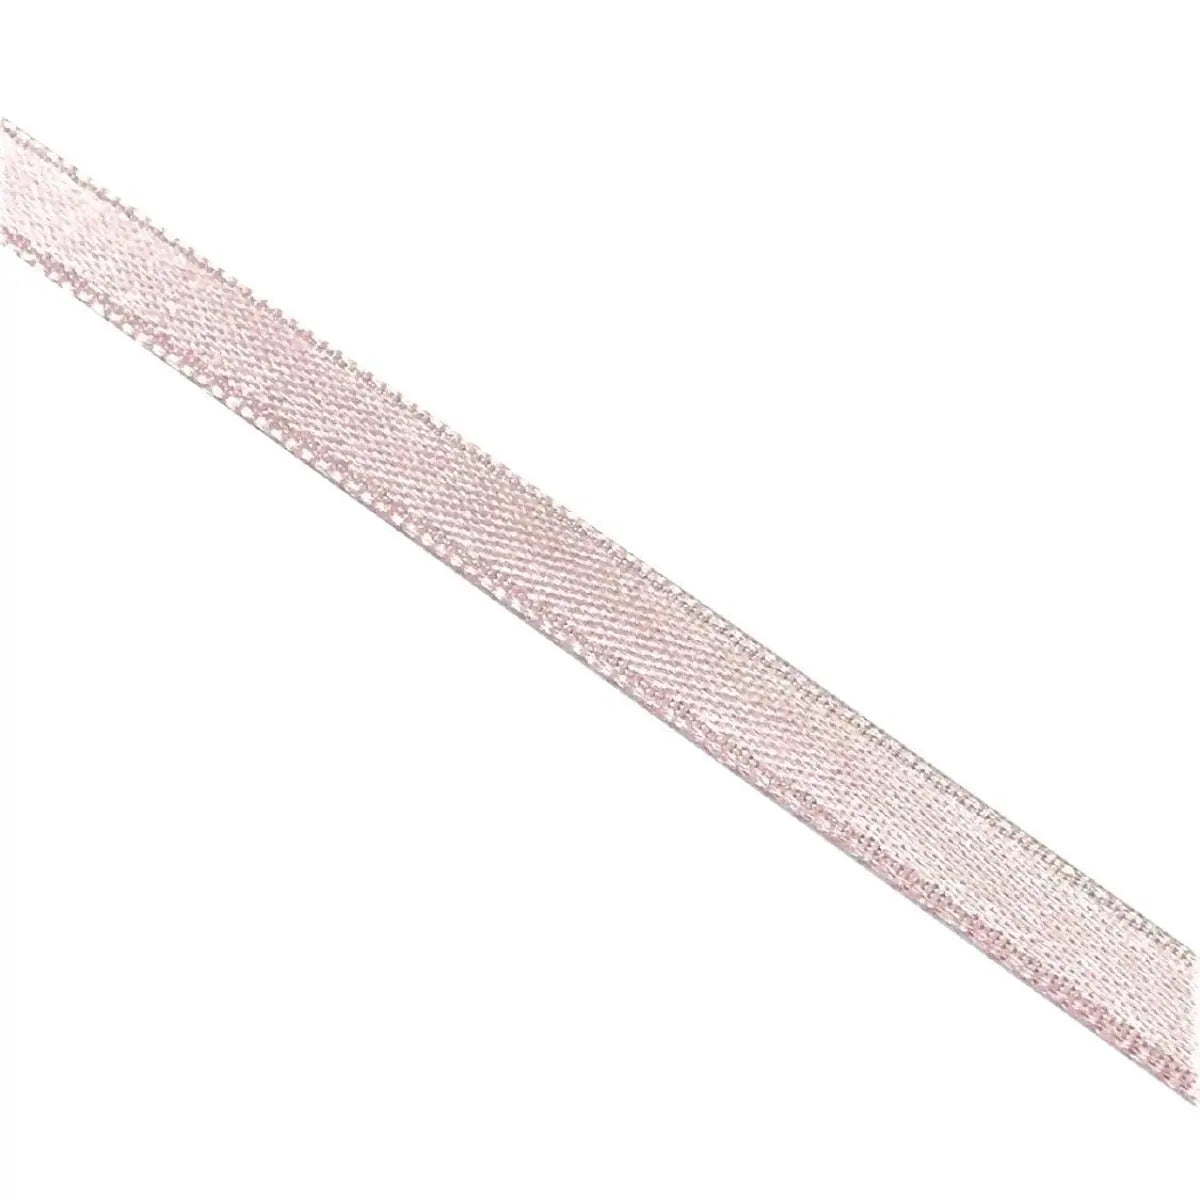 Carnation Pink 6mm Double Sided Satin Ribbon